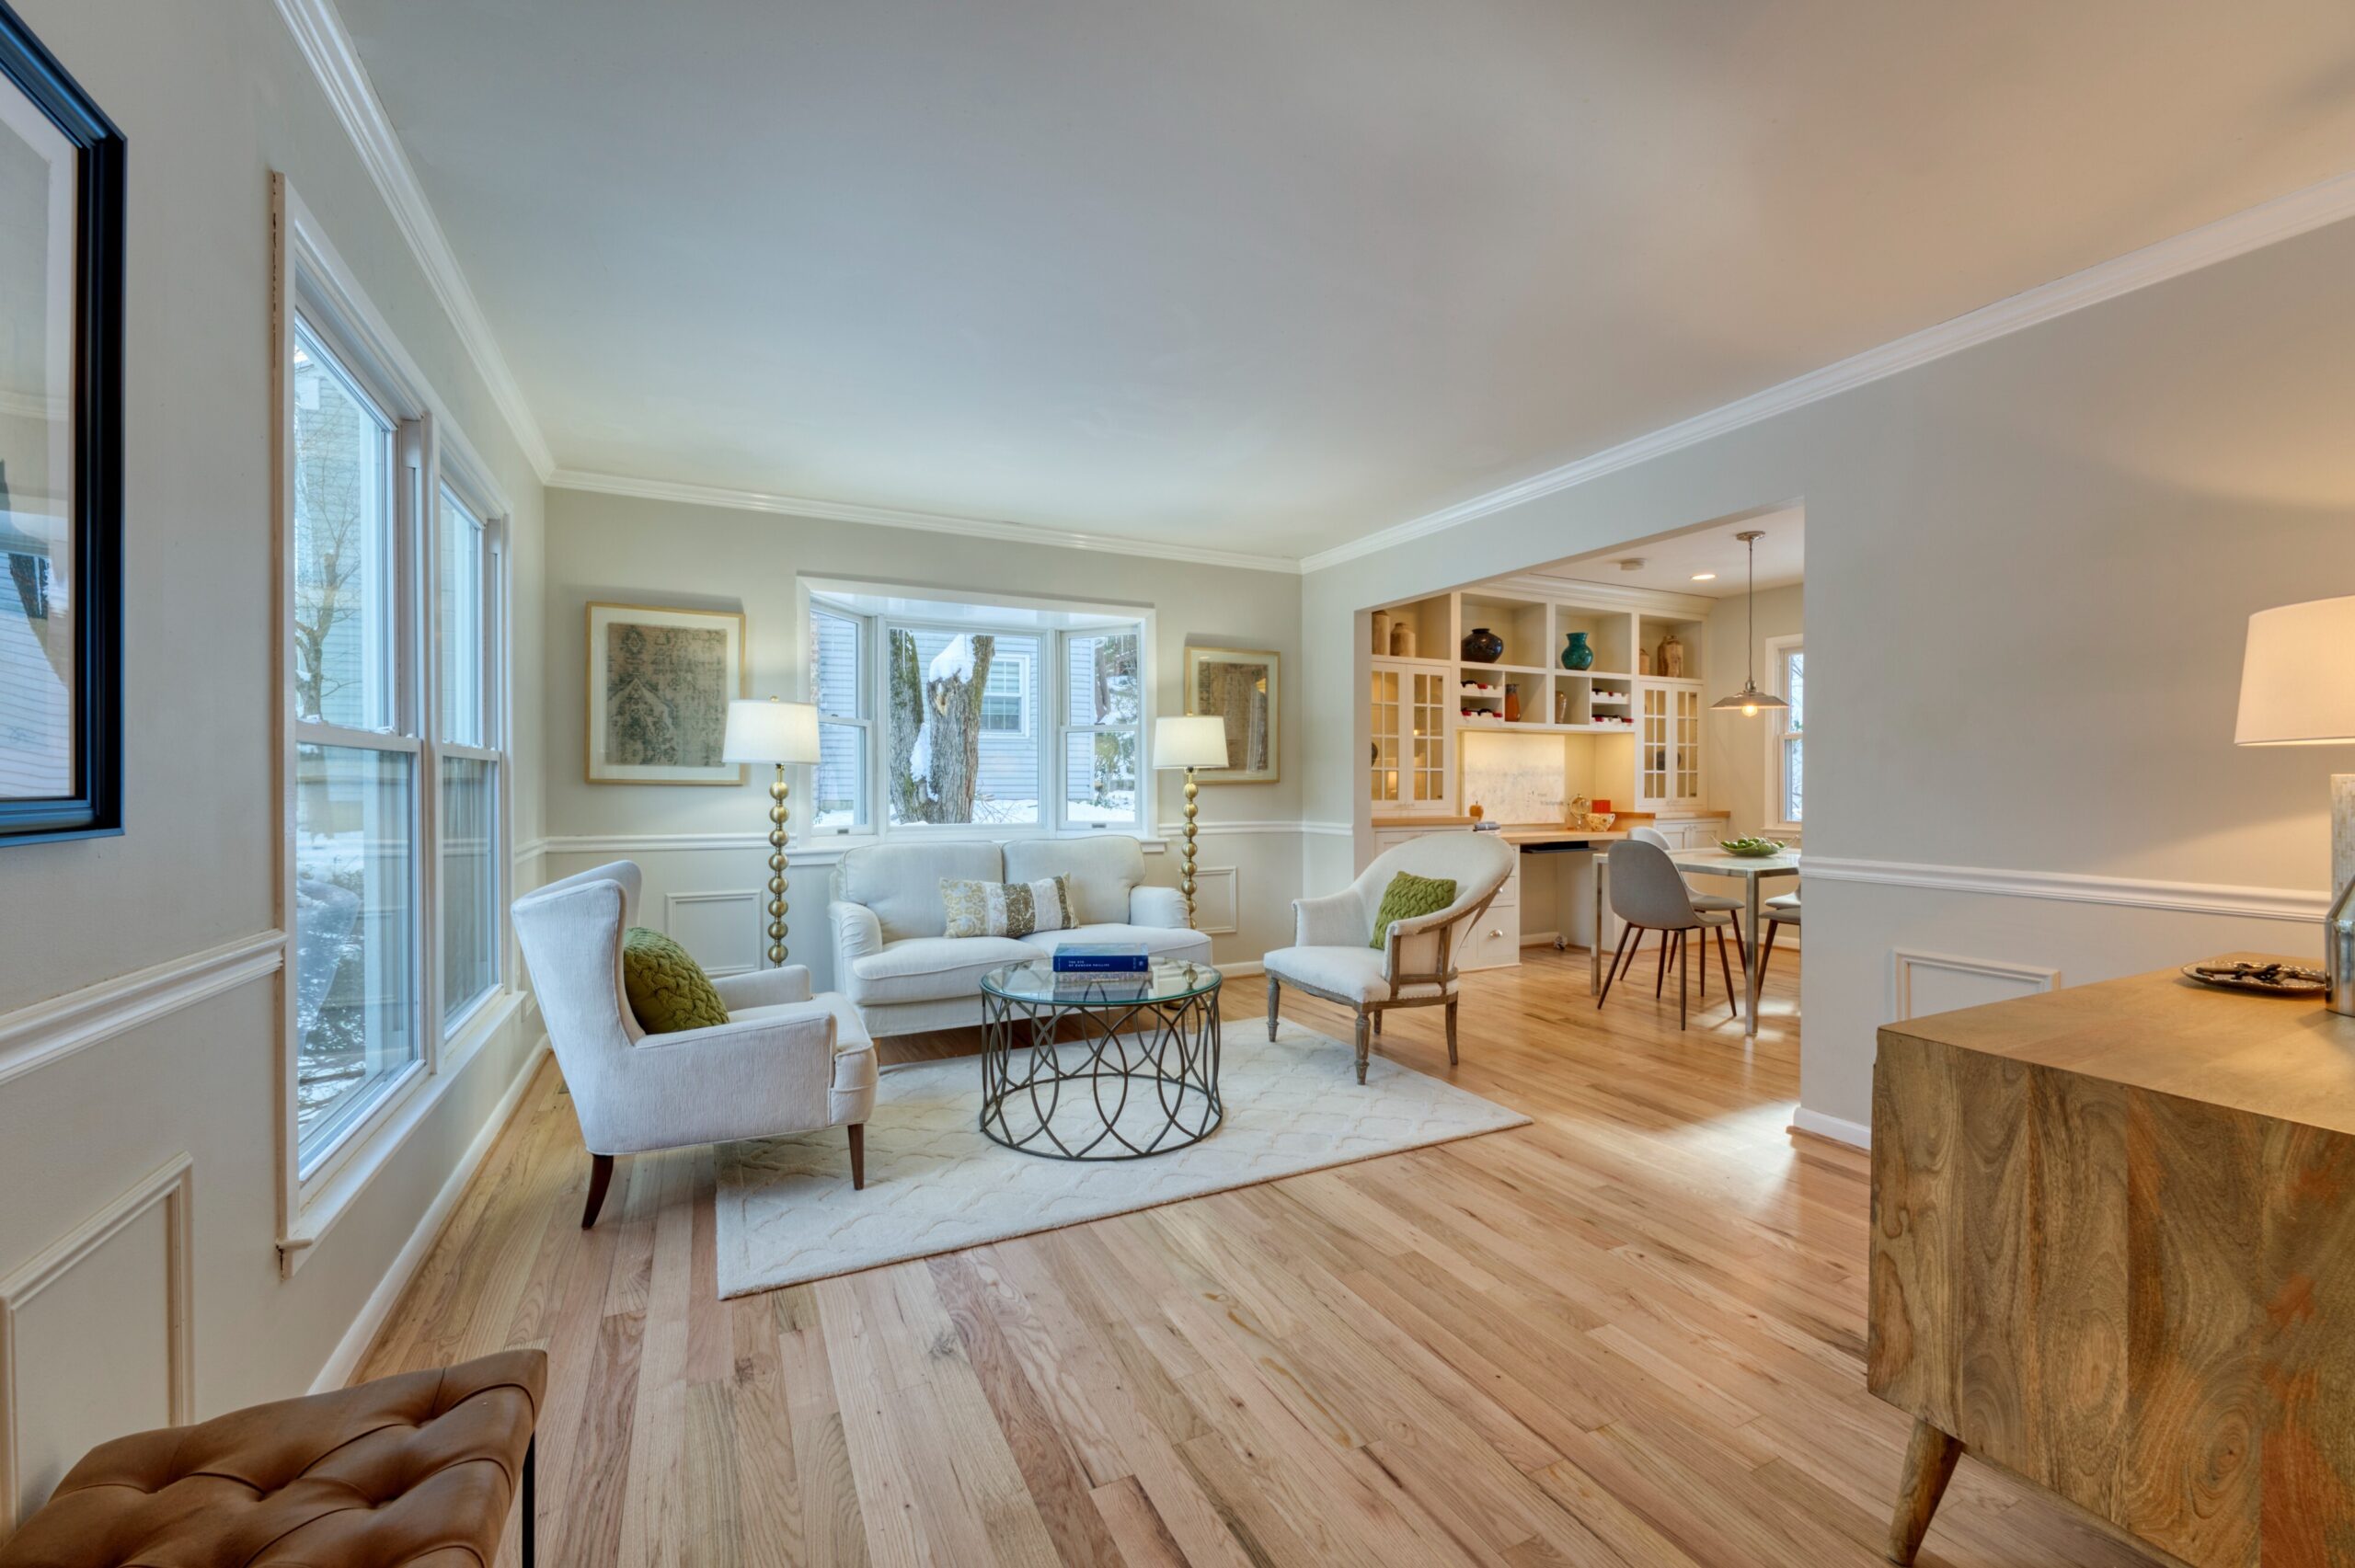 Professional interior photo of 9515 Center St in Vienna, Virginia - showing the front formal living room with hardwood floors and kitchen eating area in the far background